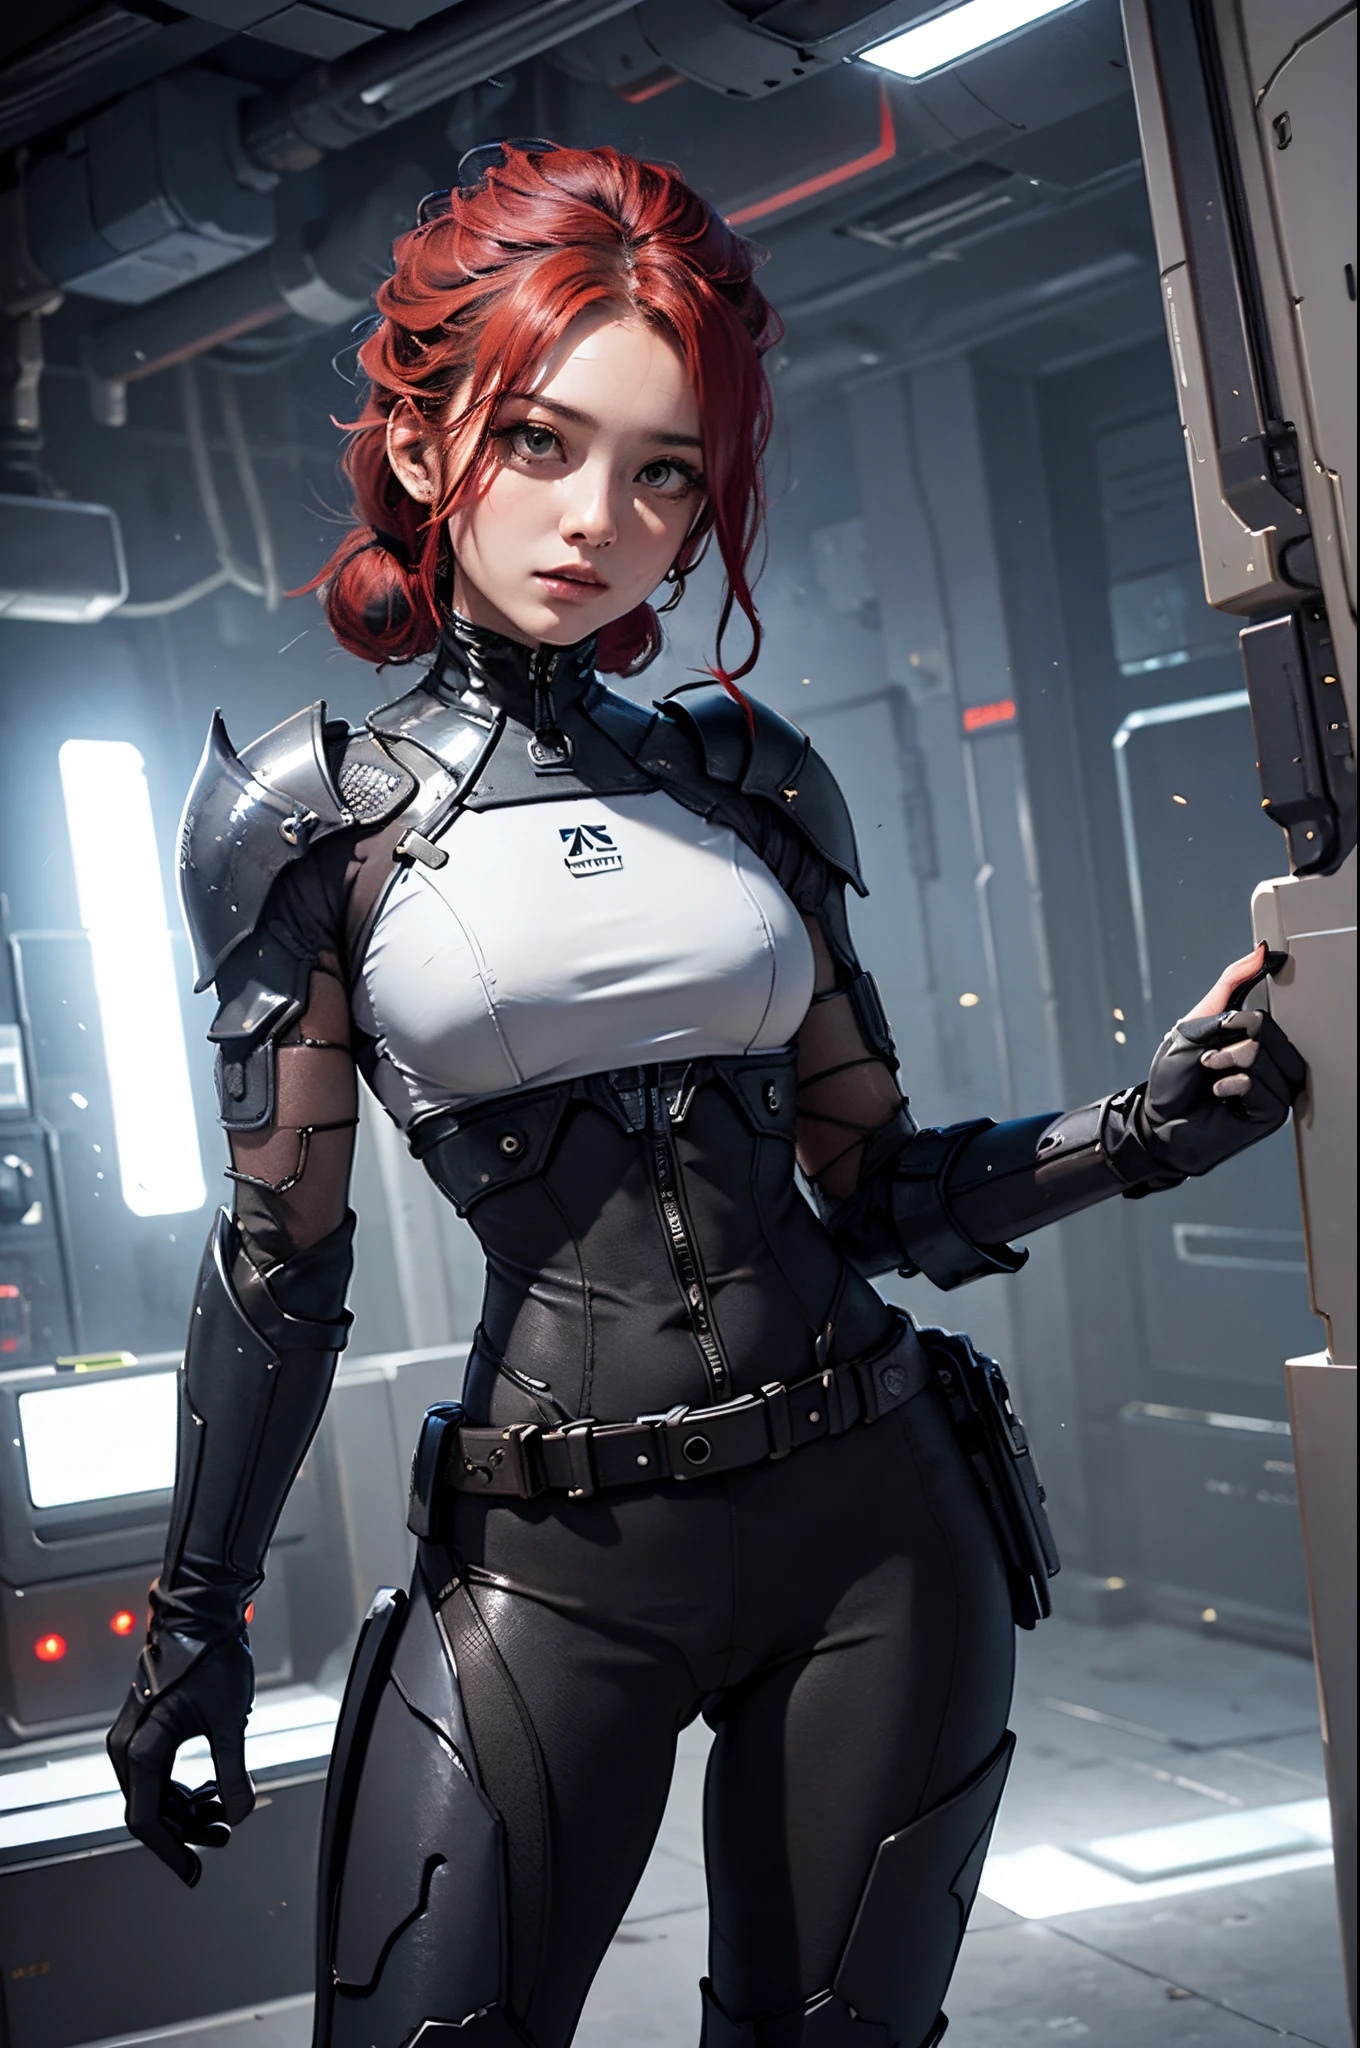 (LATIN woman BODY, WIDE HIPS:1.3), holding gun,((precise fingers, correct fingers, beautiful fingers)),futuristic armor on small chests, 37 year old Asian woman, dynamic poses,red hair
equipment strap on the waist, gun on the hip, (bodysuit :1.2), (machanical armor gloves:1.3),female cybersuits,(mechanical armor leggins:1.2), mechanical, electricity, elaborate detail,armor in cyberpunk style, female cyborg.diverse cybersuits
battle field, Full shot, plano integral fotografia, low angle camera,